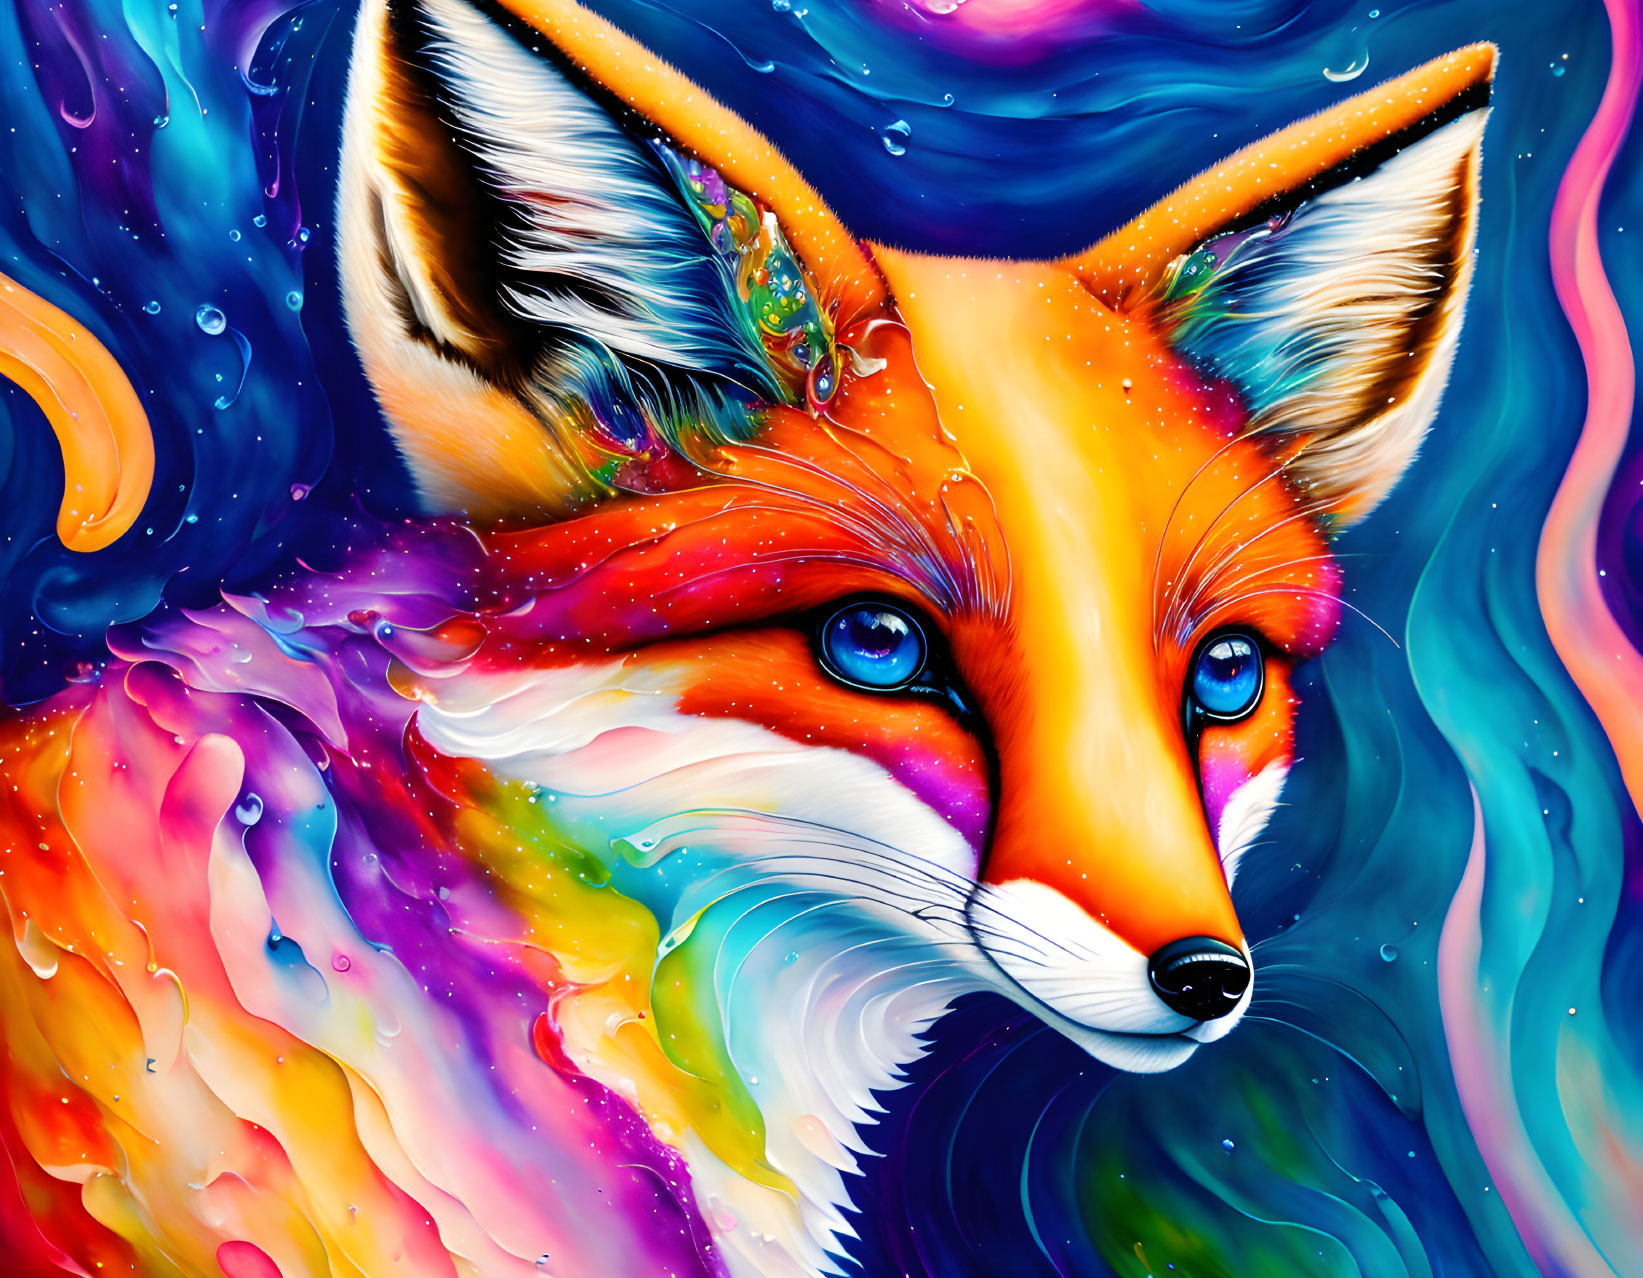 Colorful Fox Artwork with Bright Swirling Colors and Glossy Textures